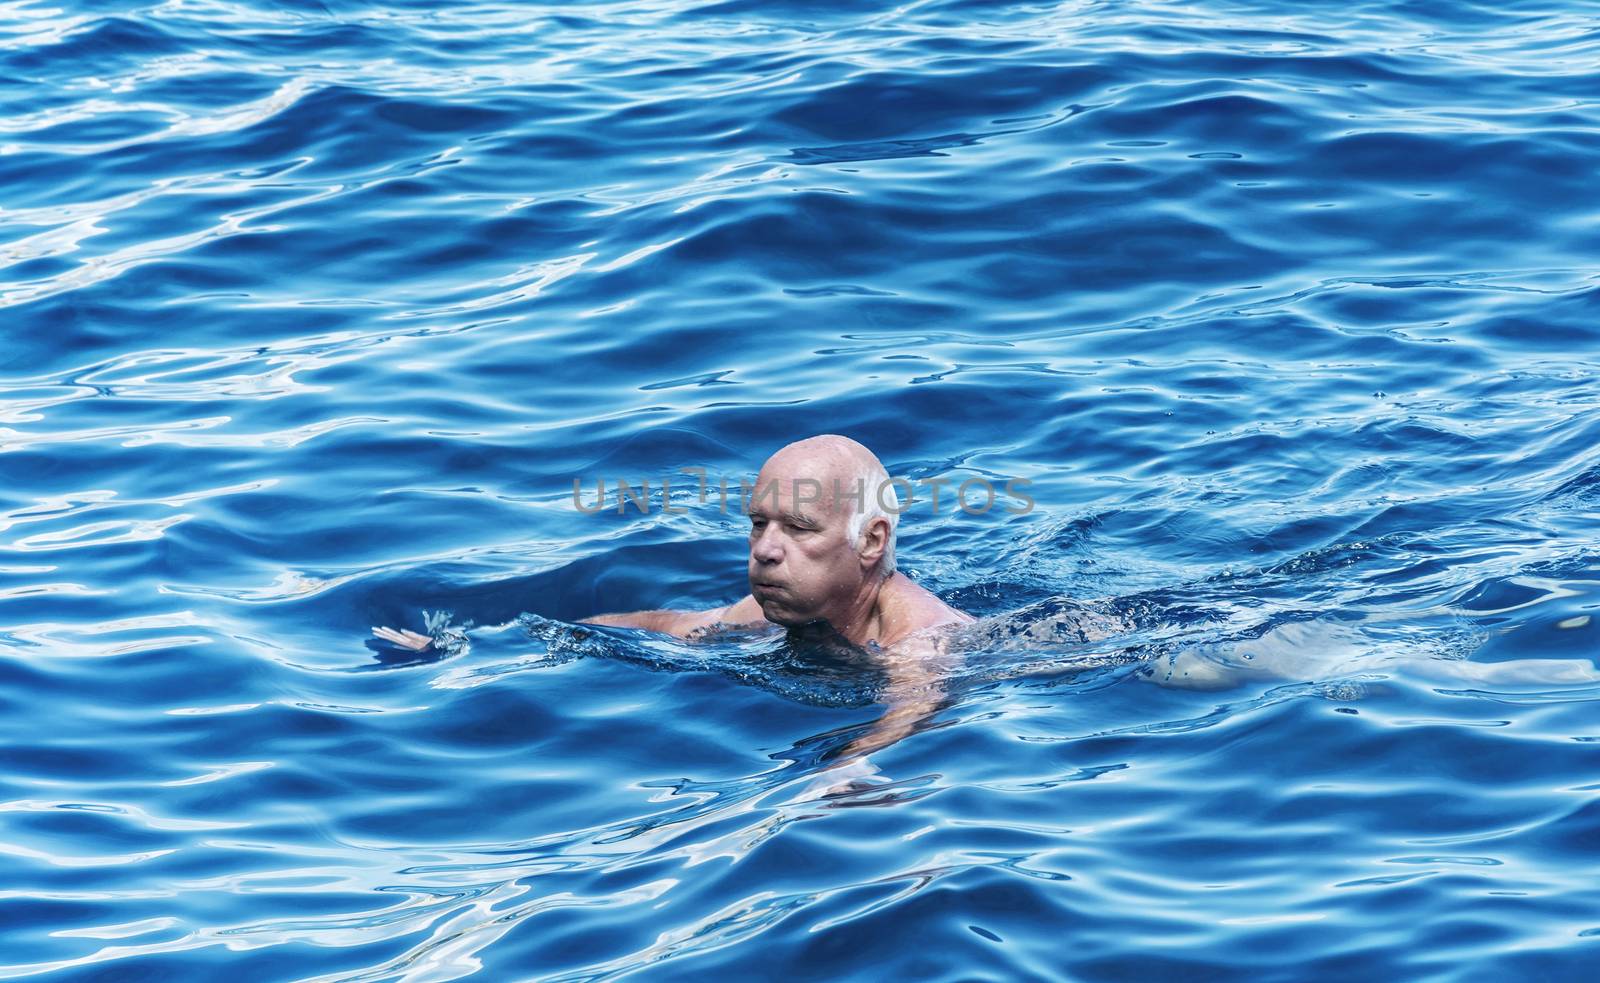 Gray-haired man of mature age bathes in water by Grommik